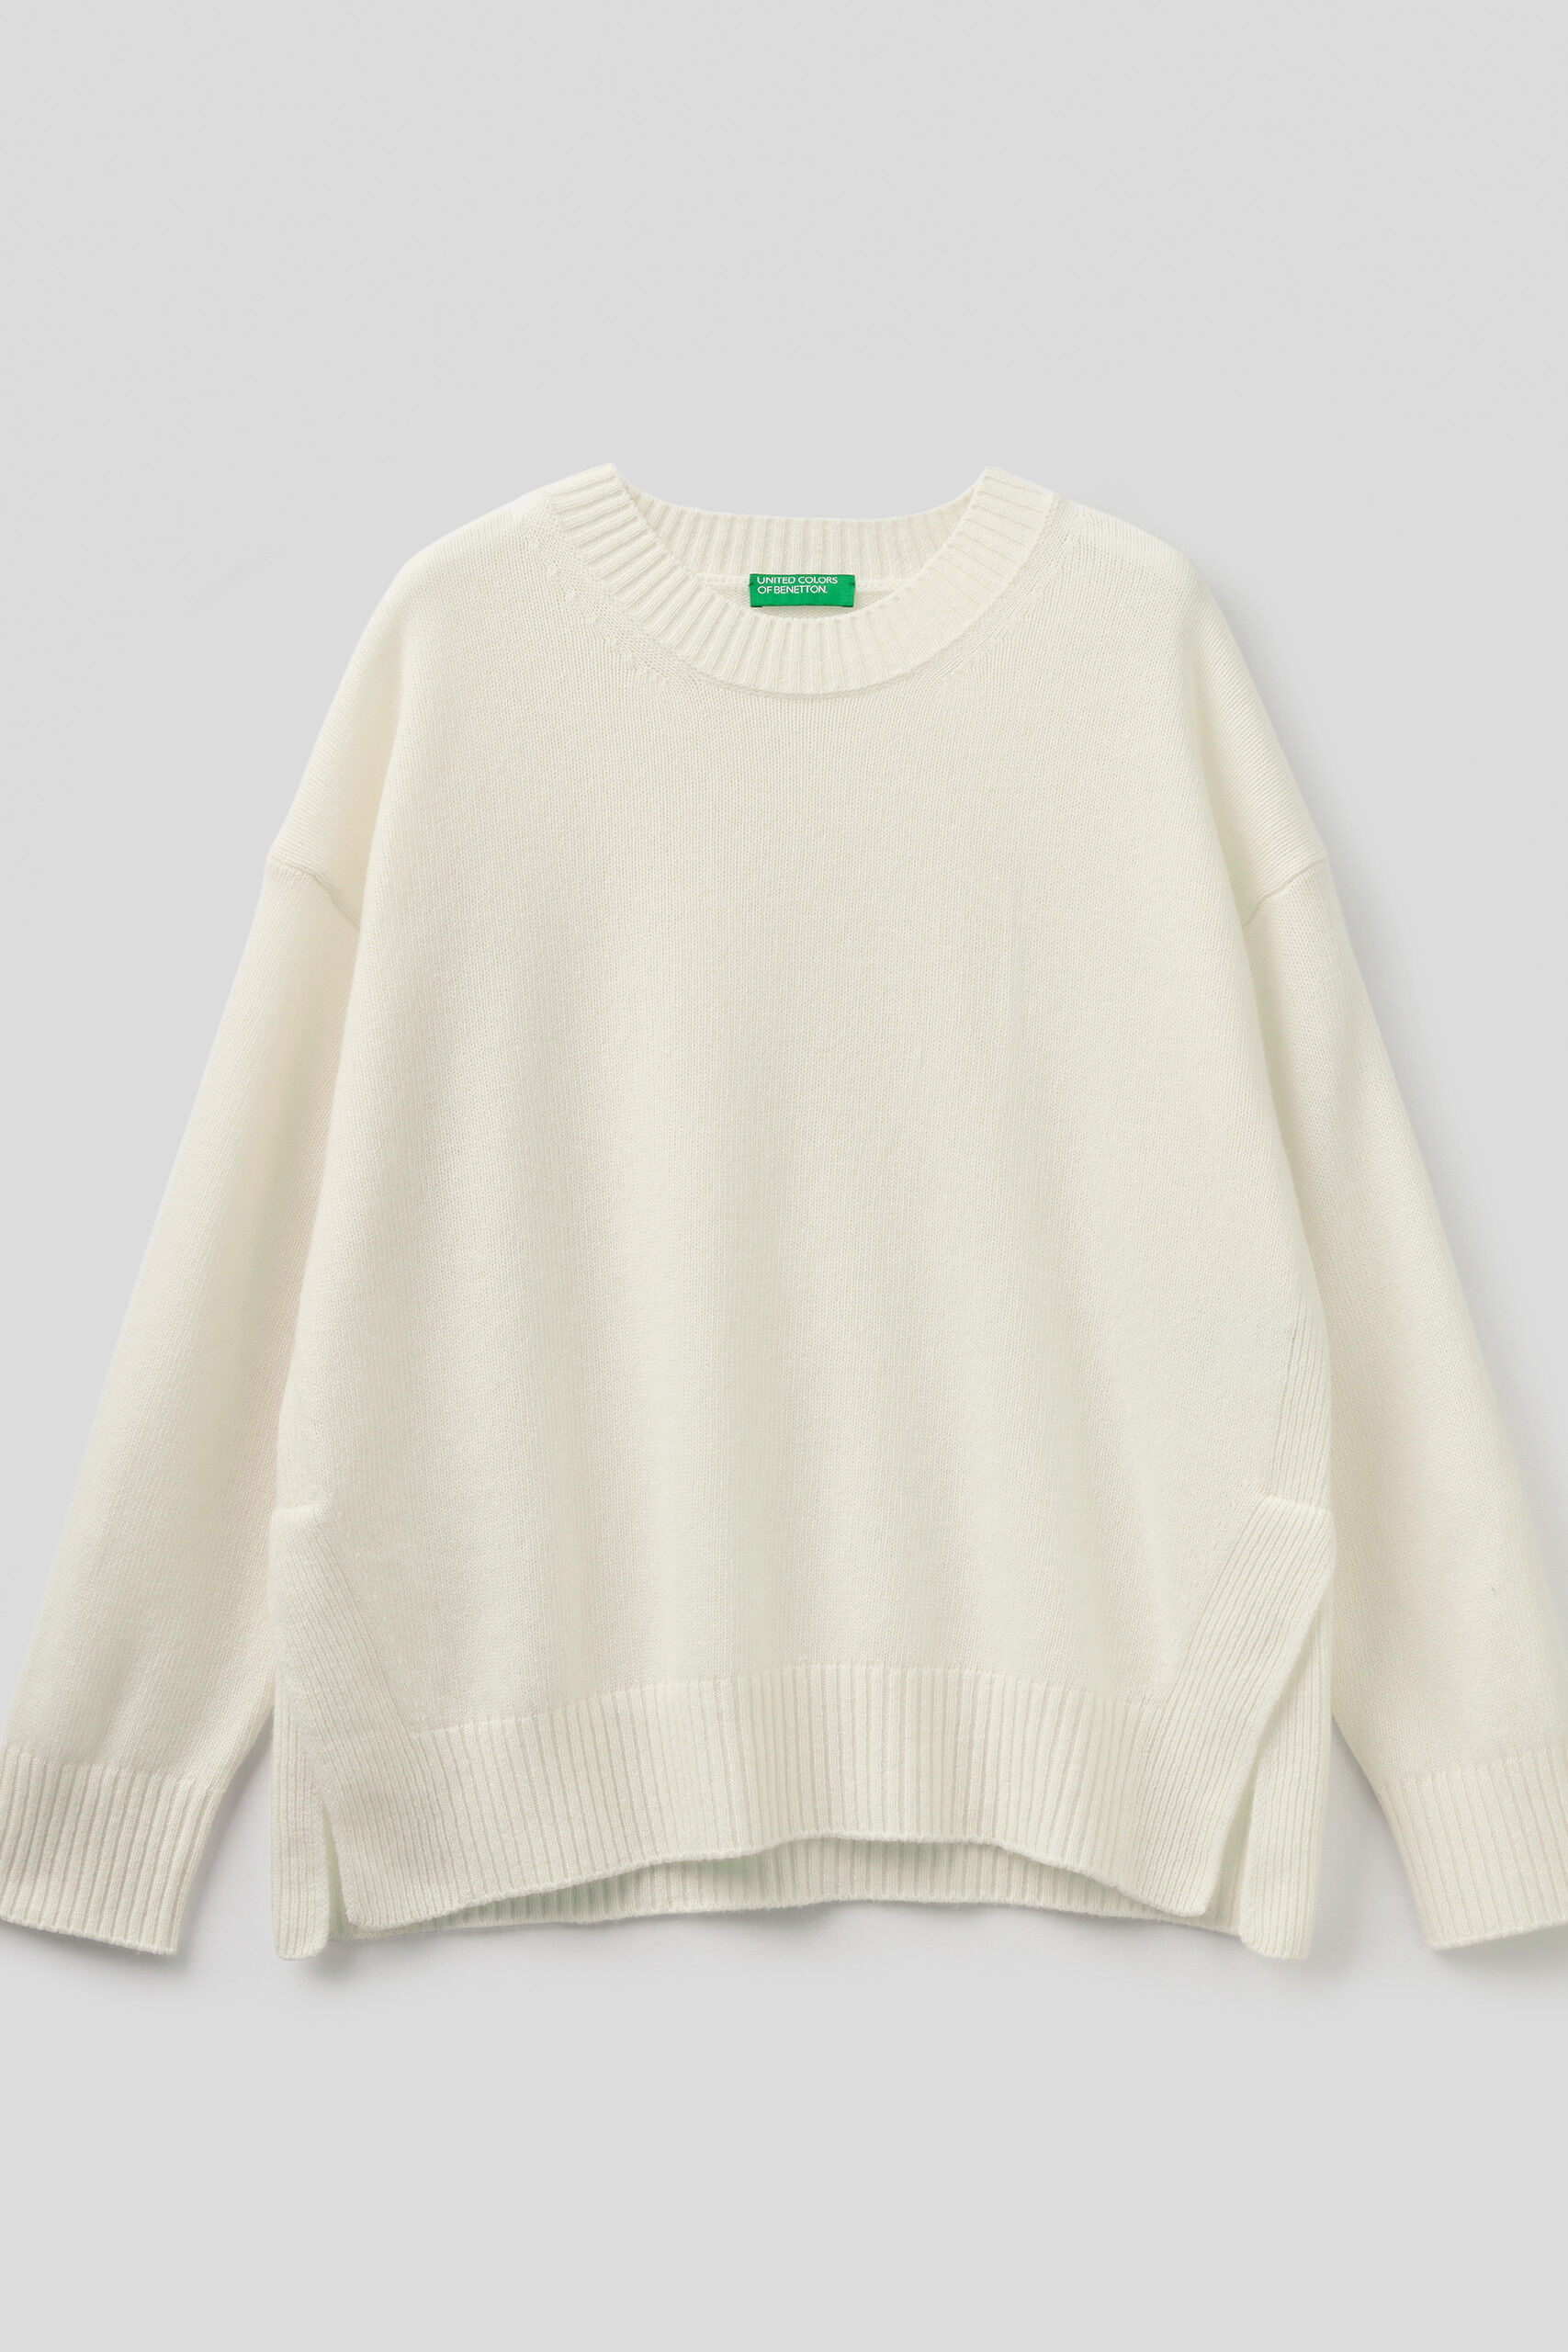 Women's Iconic Knitwear New Collection 2022 | Benetton